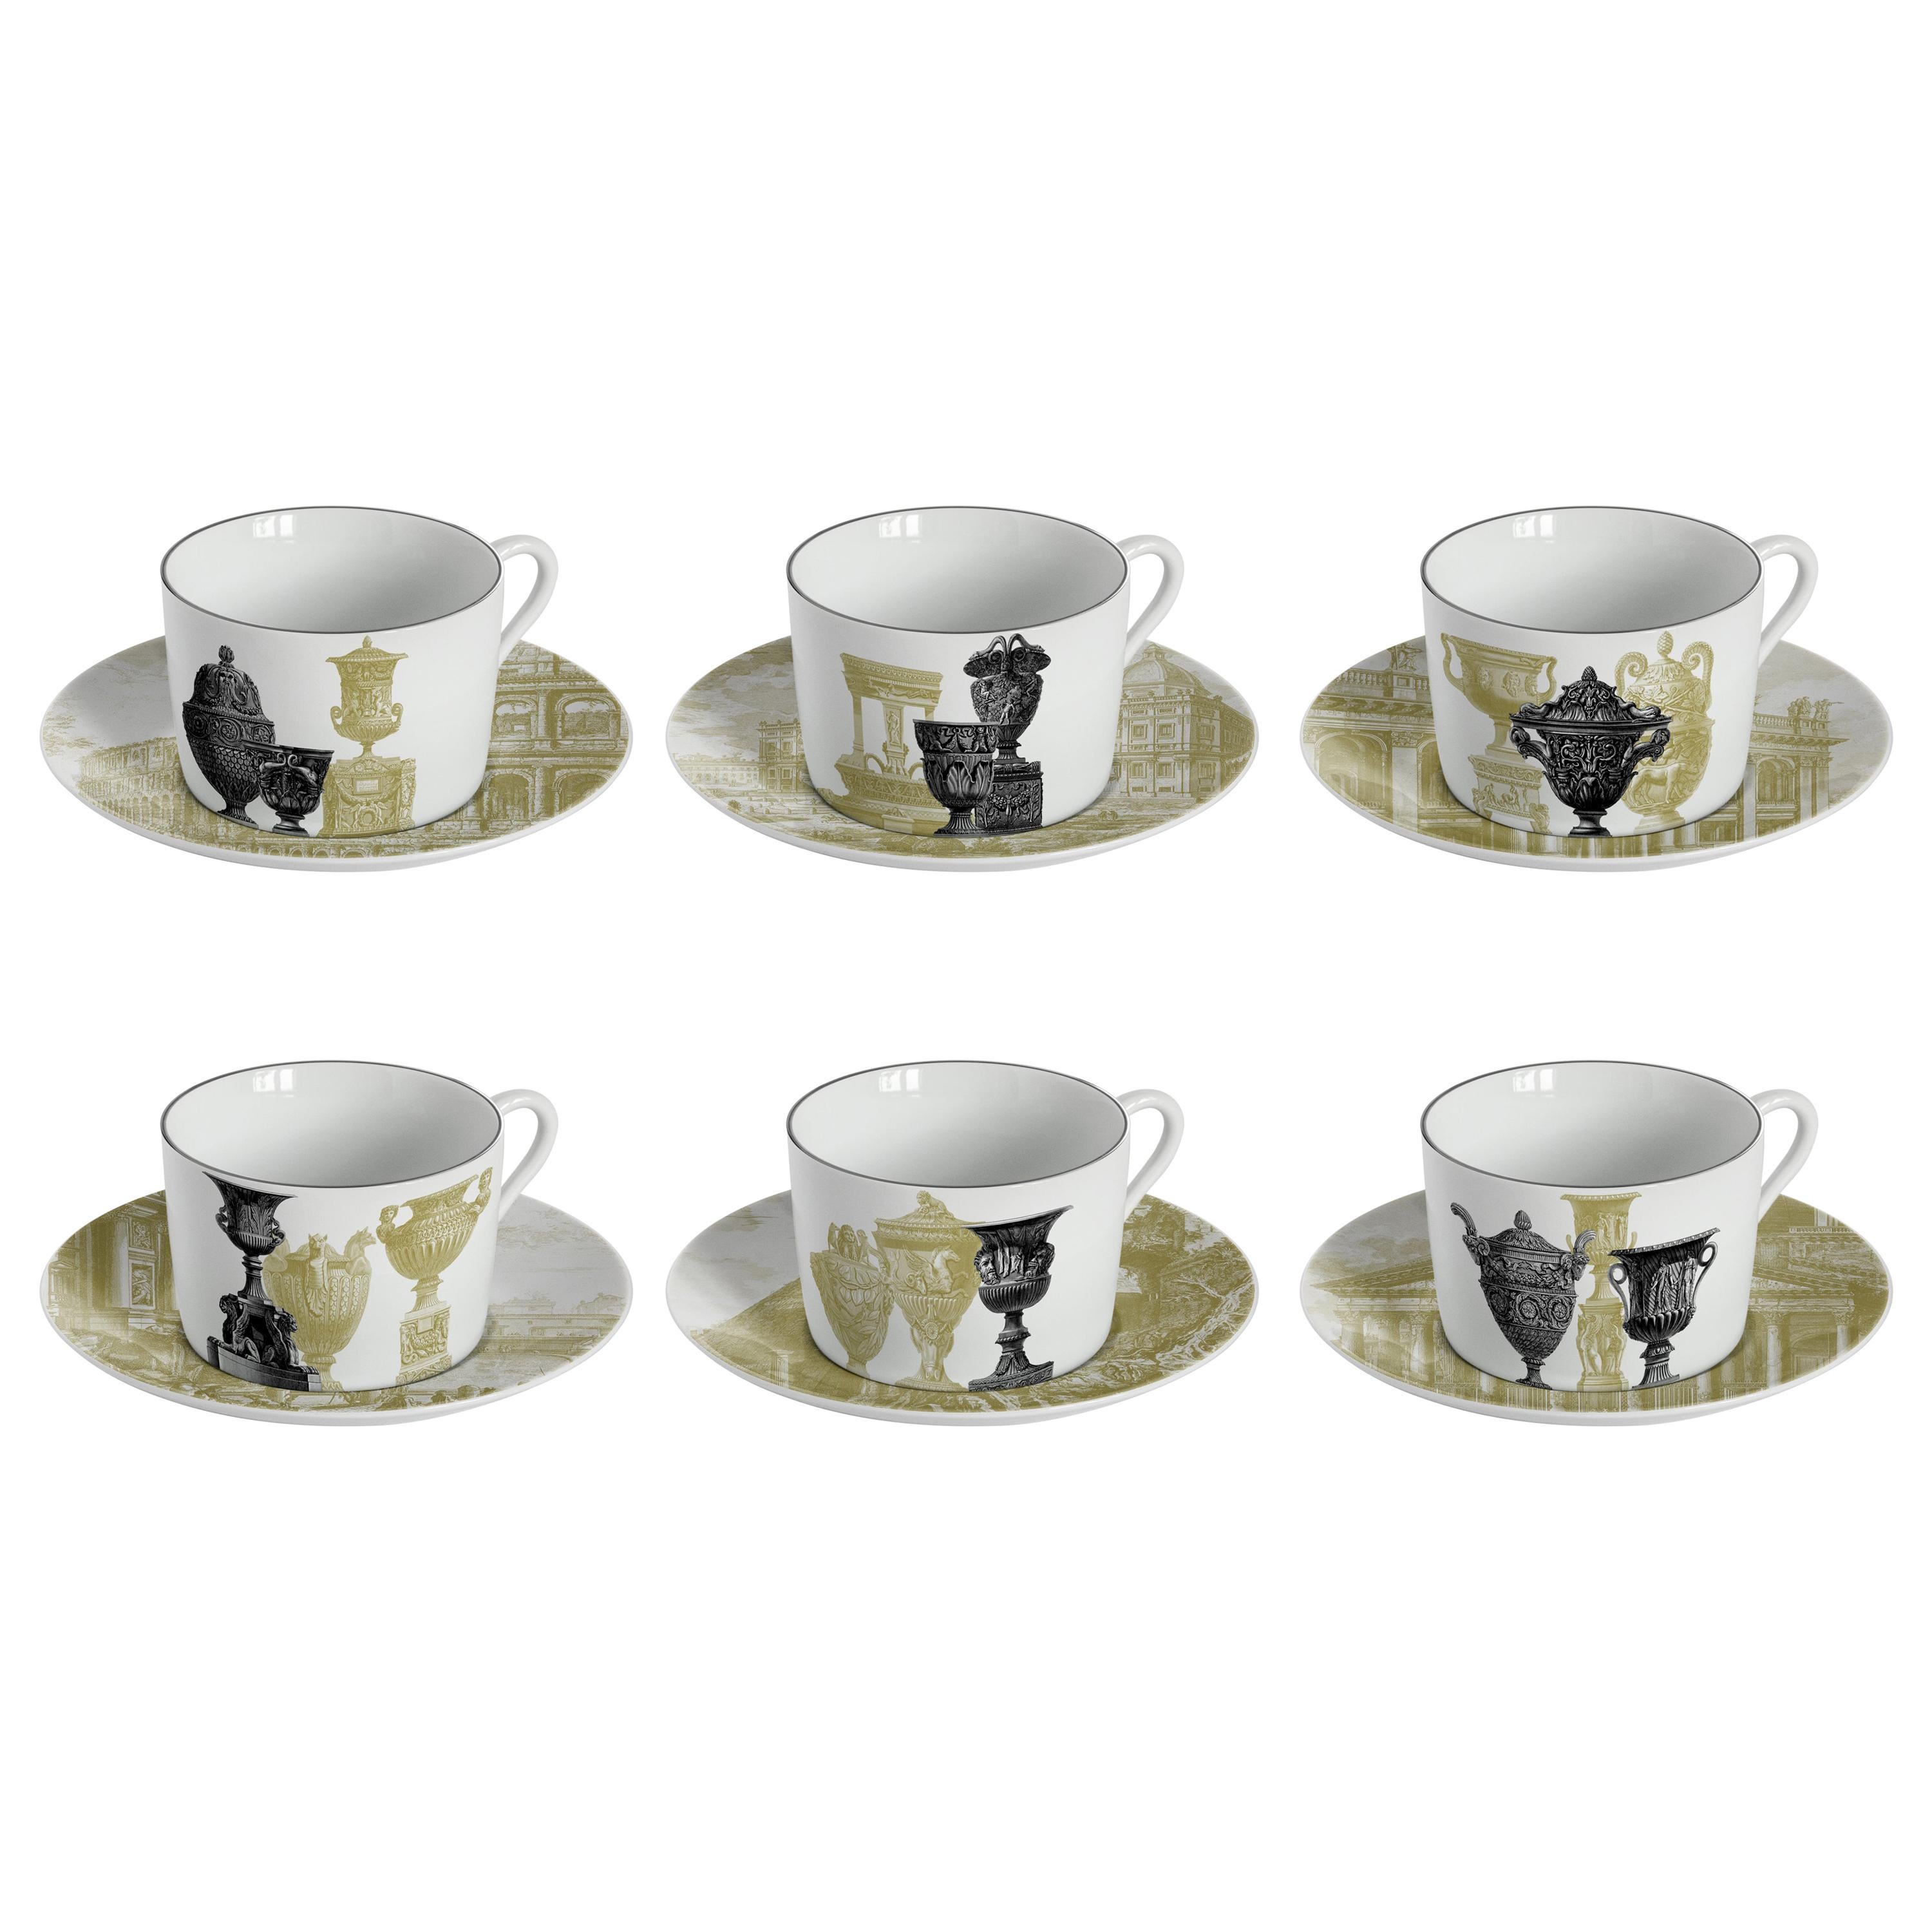 Roma, Tea Set with Six Contemporary Porcelains with Decorative Design For Sale